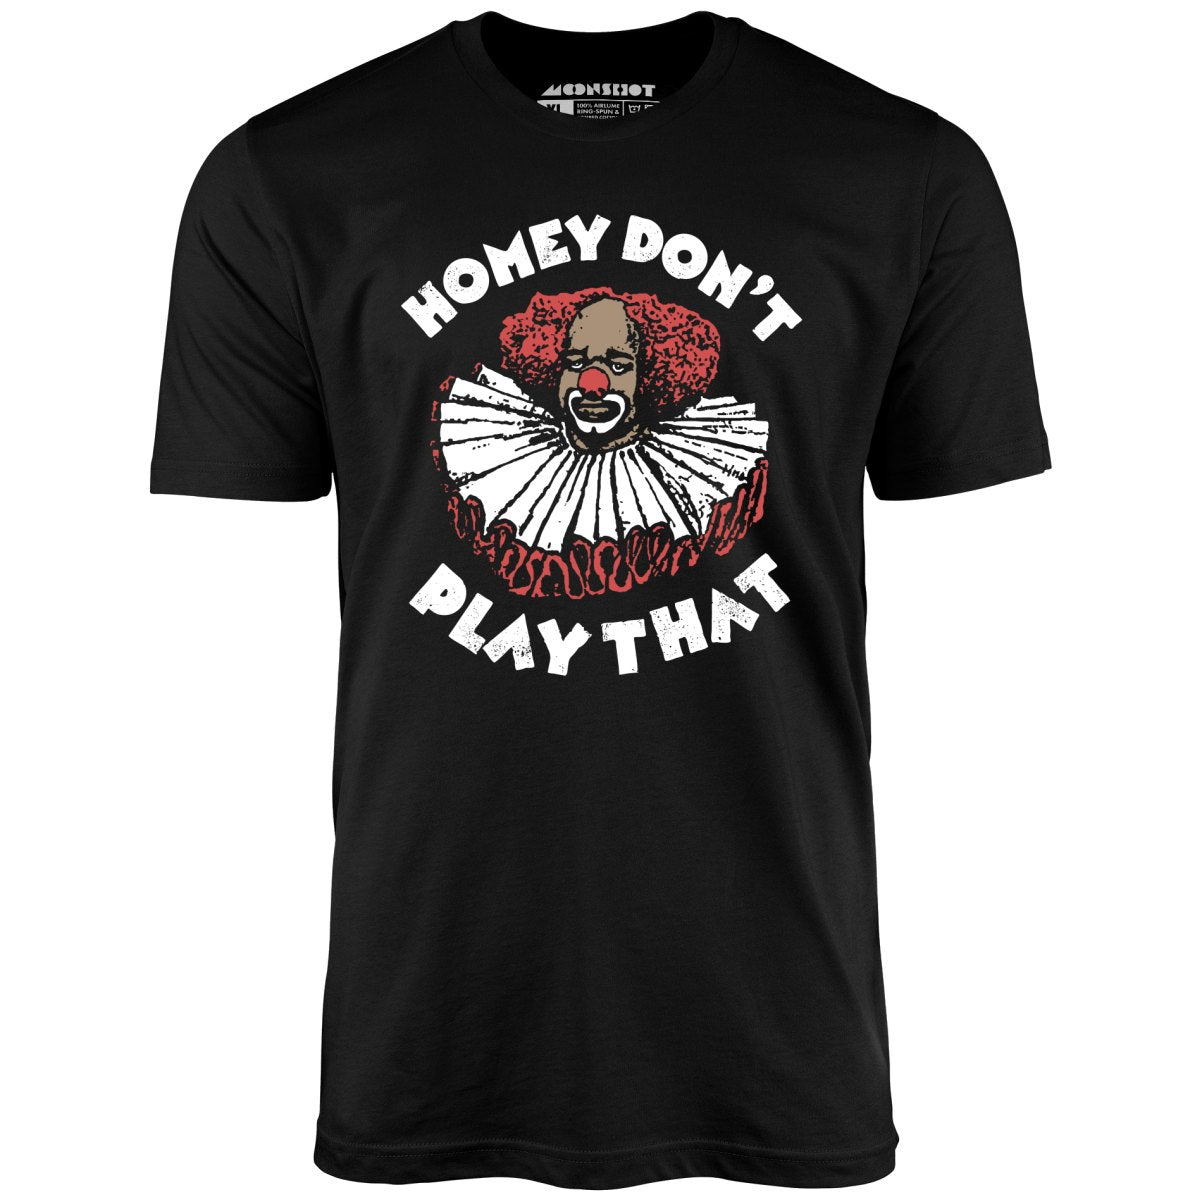 Homey Don't Play That - Unisex T-Shirt